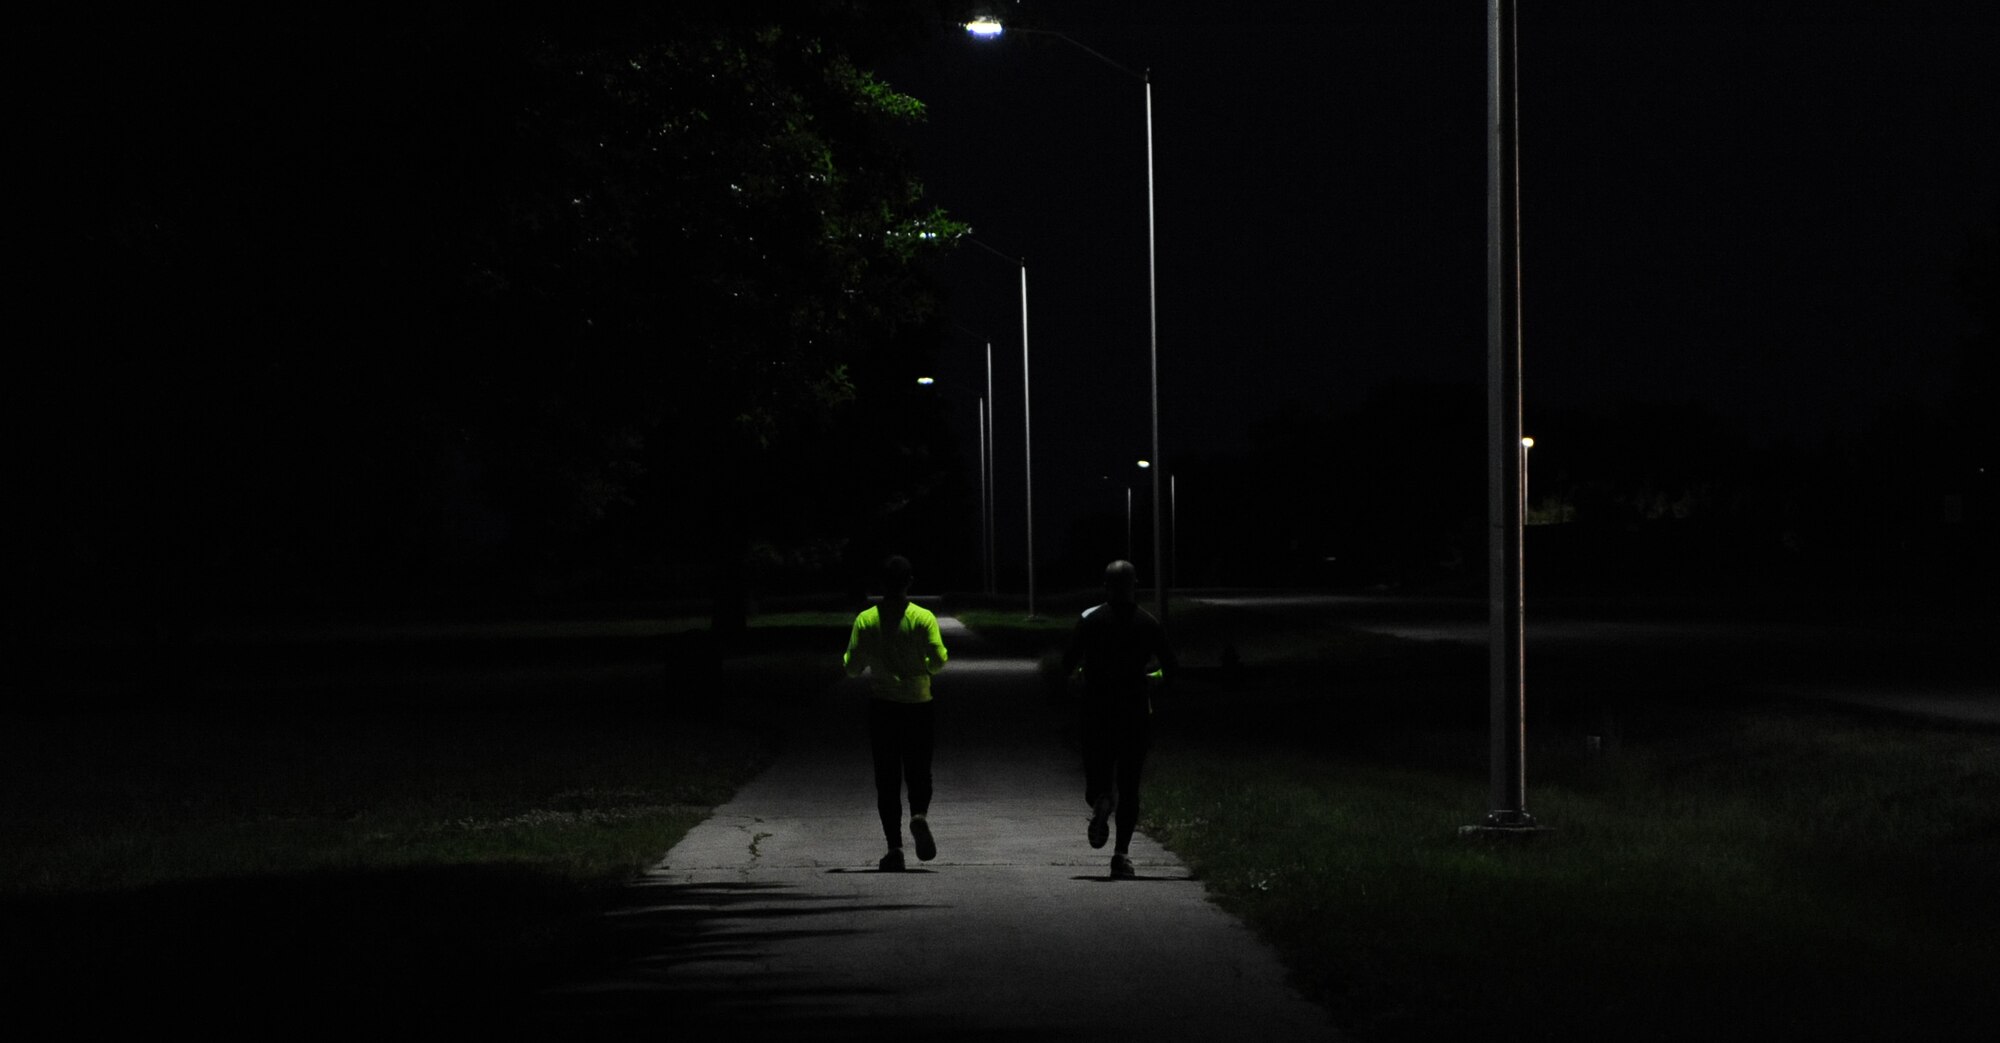 U.S. Air Force Staff Sgt. Brendan Brustad and 1st Lt. James Laughridge, both from the 509th Medical Support Squadron, run during the early hours of the day at Whiteman Air Force Base, Mo., May 19, 2015. The Joplin Memorial Run is an annual event where participants can register to run a half-marathon or a 5K. Brustad registered for the run but rather than running the distance, he ran 161 miles over the course of six days, all on Whiteman Air Force Base. (U.S. Air Force photo by Senior Airman Joel Pfiester/Released)
